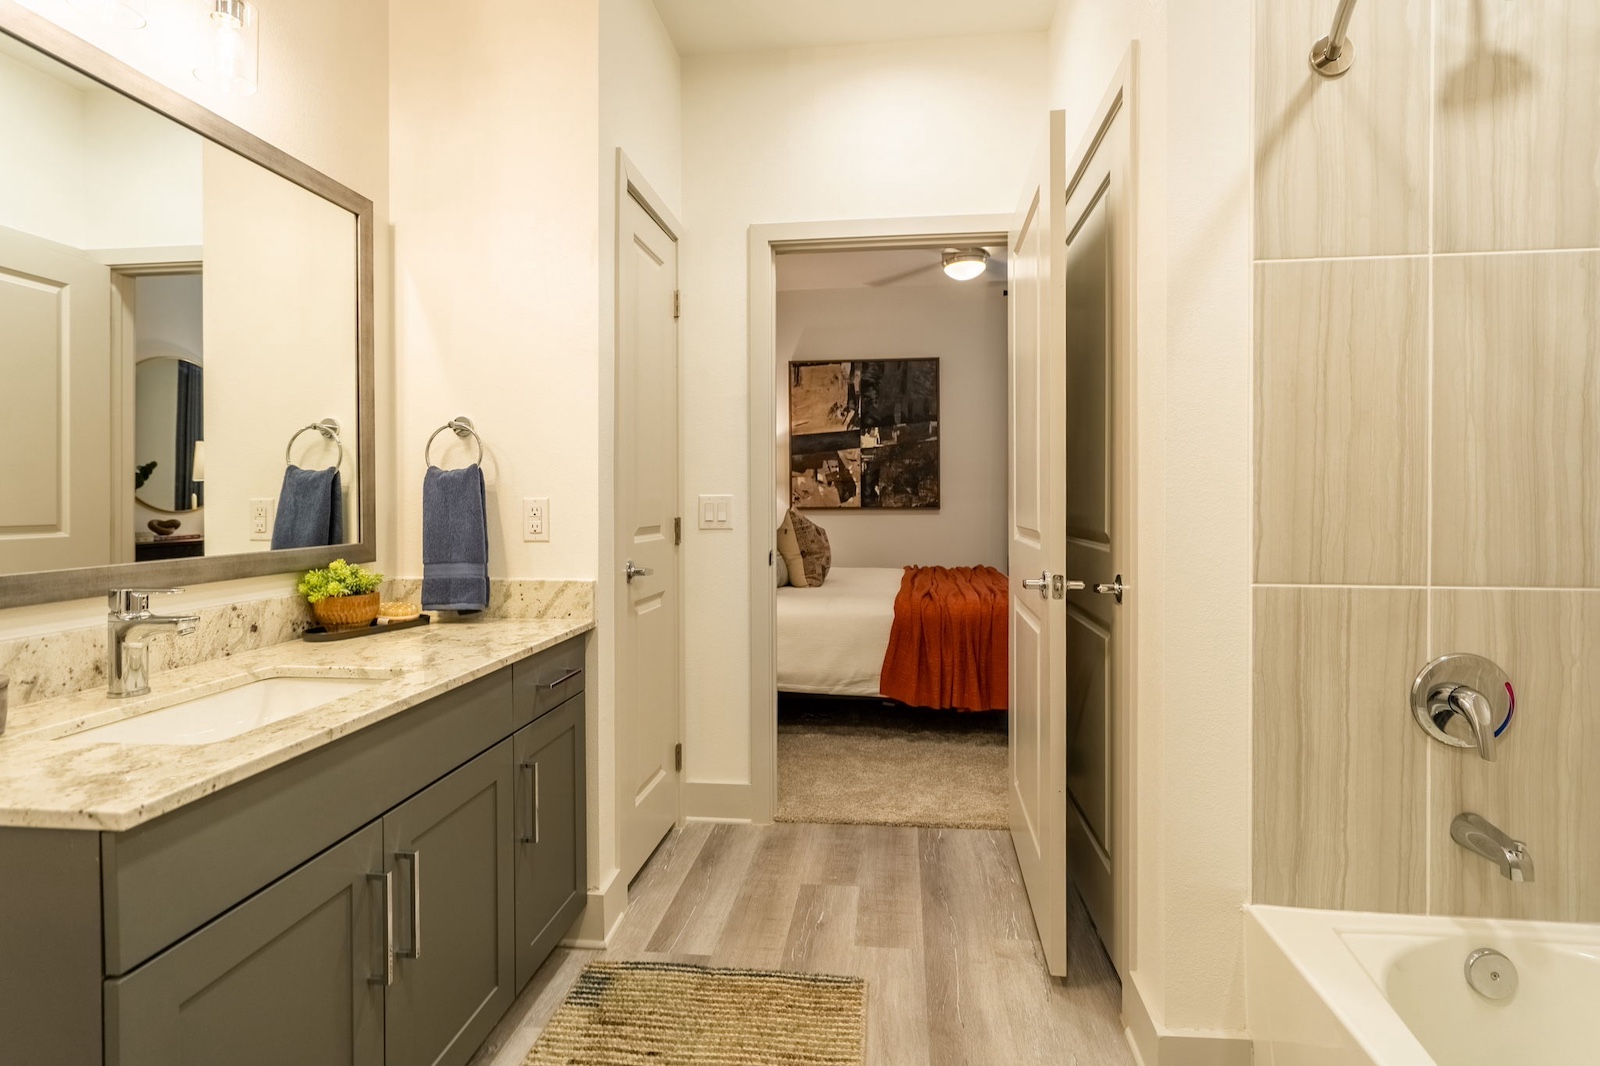 Spacious bathroom with granite countertops at our luxury apartments Cypress. Residences